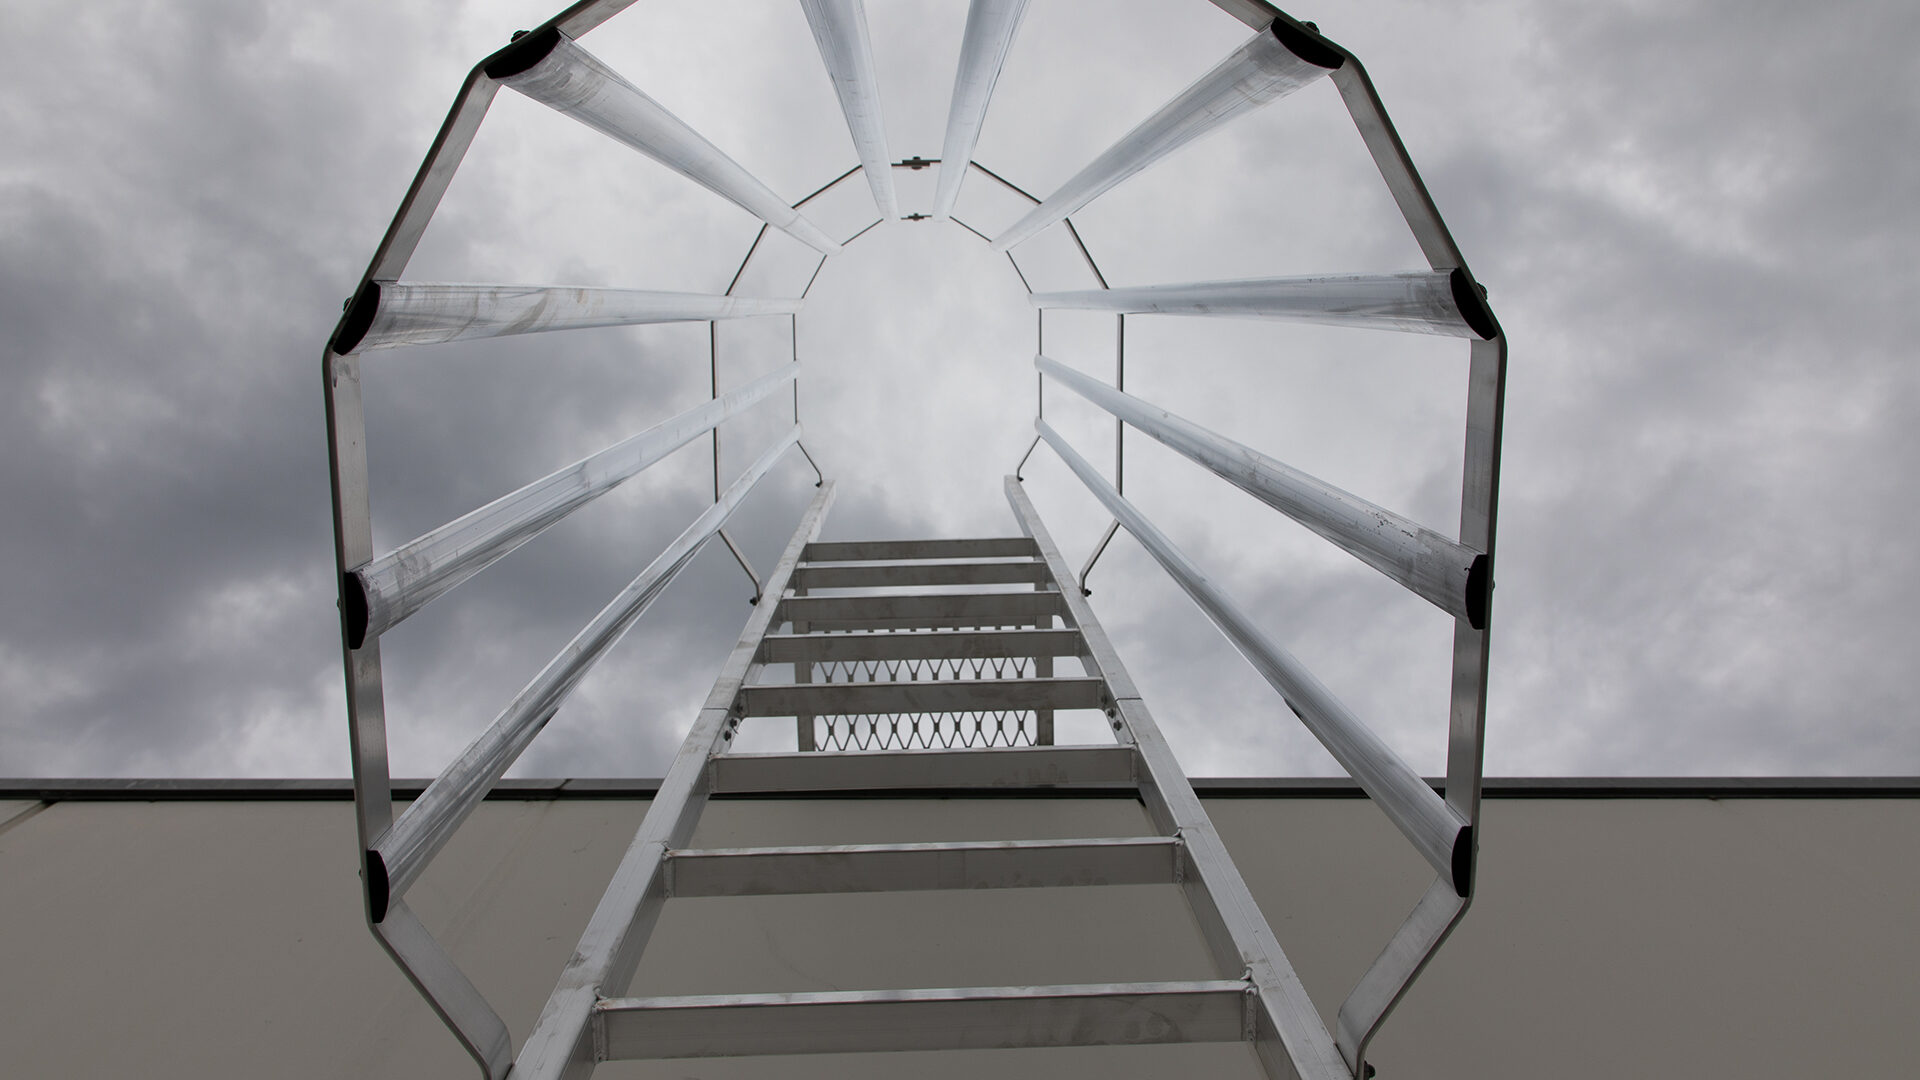 Looking up a fixed ladder, through an installed ladder cage, to the sky.